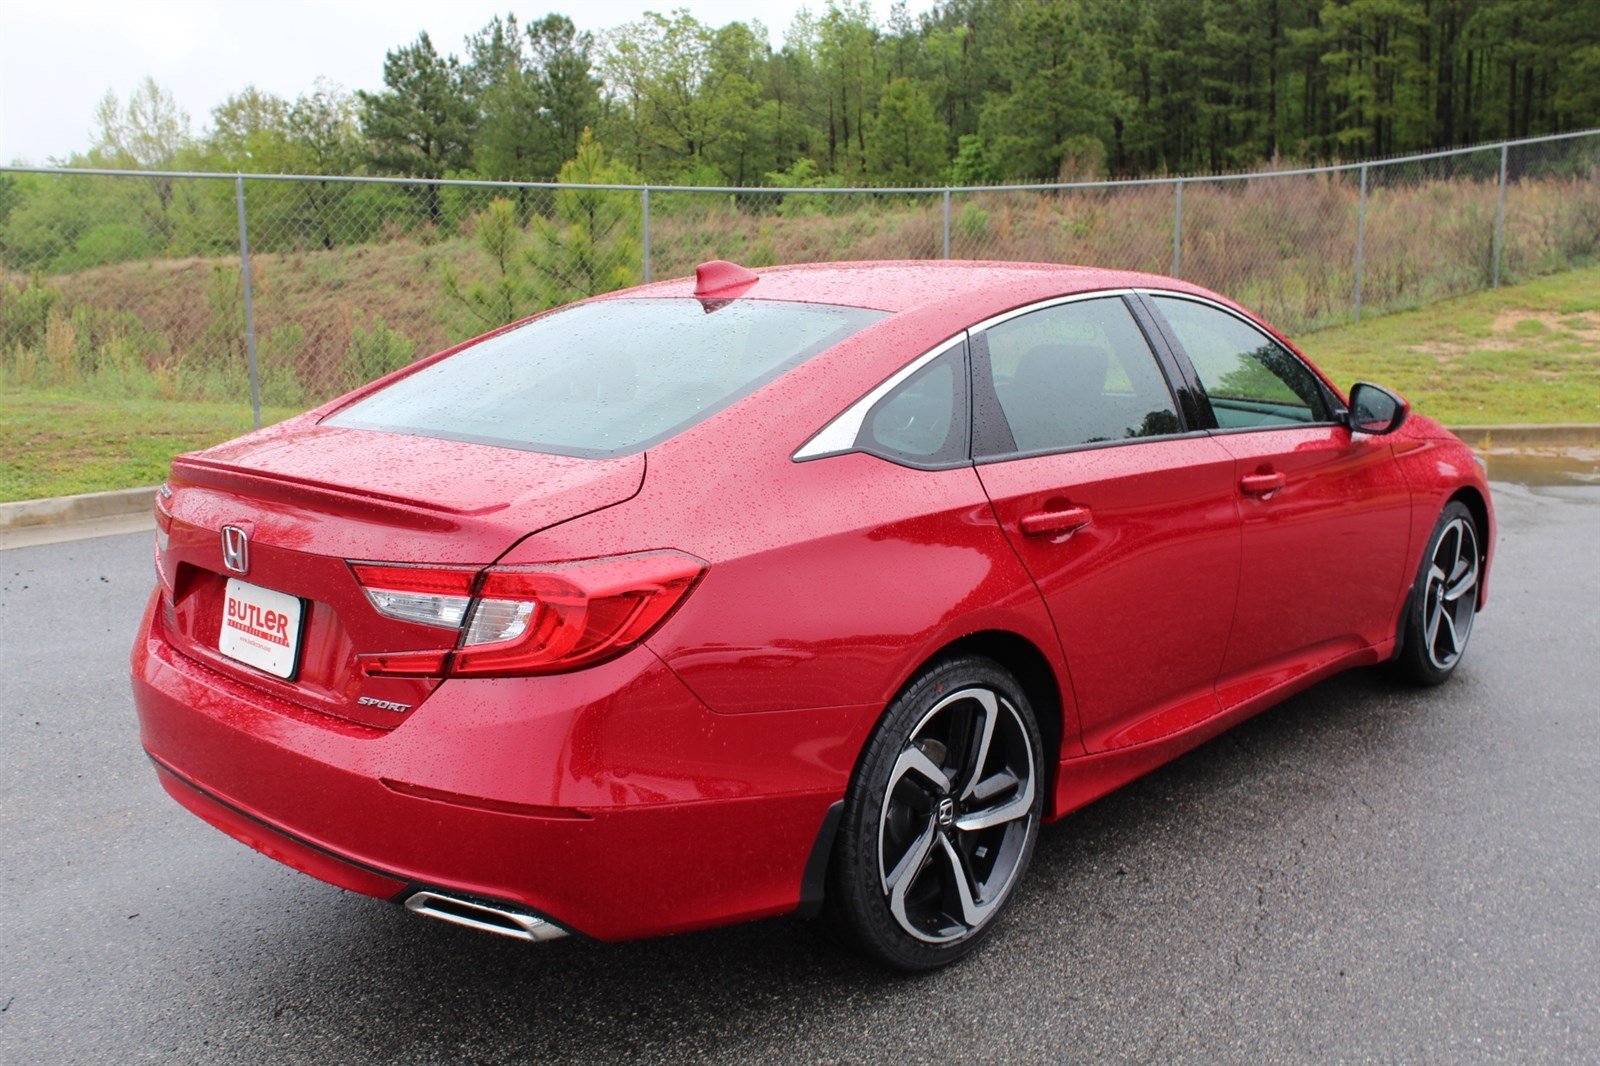 New 2019 Honda Accord Sport 1.5T 4dr Car in Milledgeville #H19262